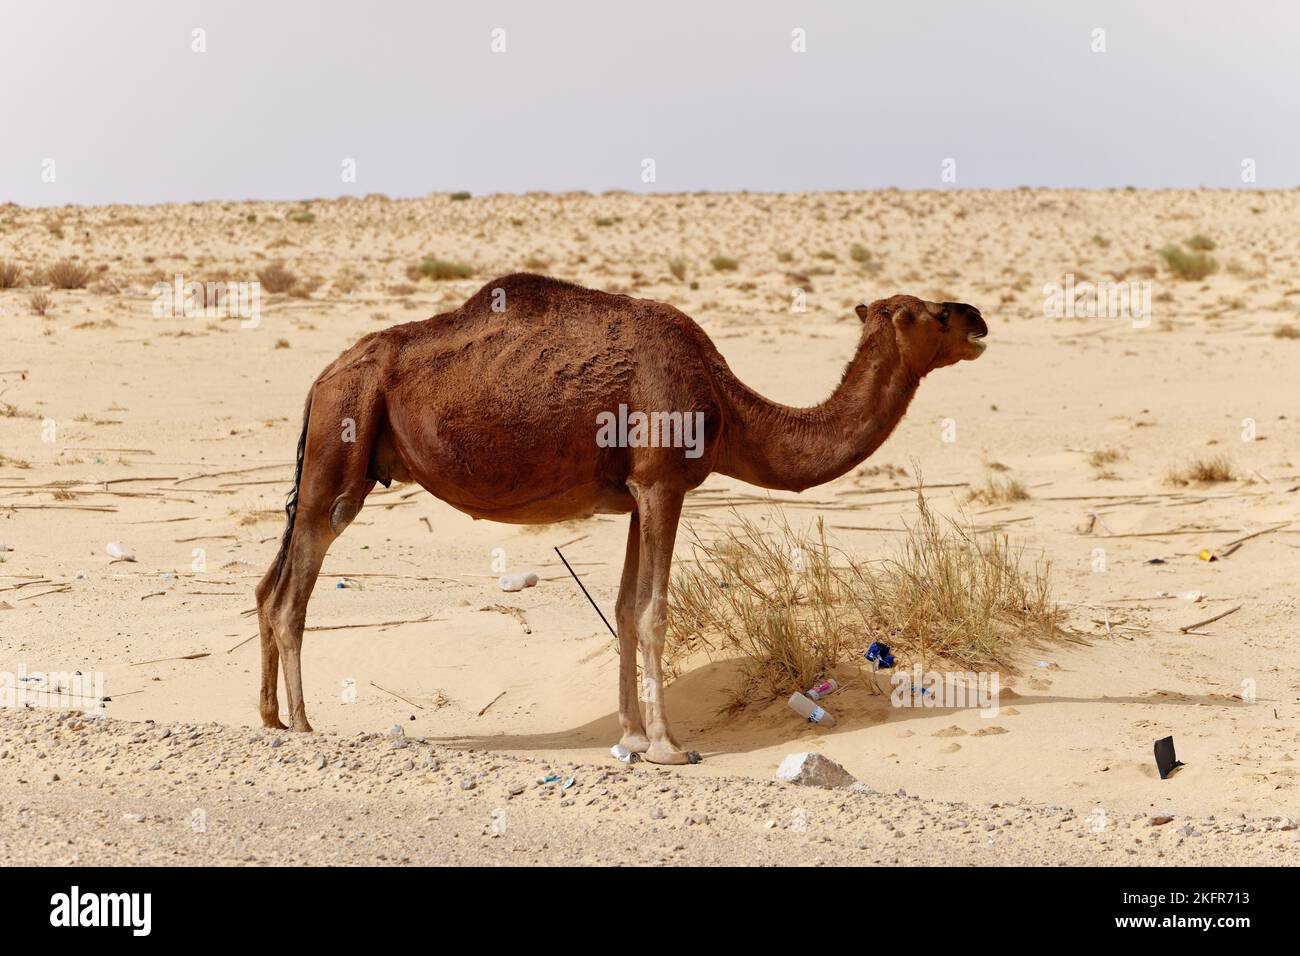 Lonely camel in the desert. Wild animals in their natural habitat. Wilderness and arid landscapes. Travel and tourism destination in the desert. Stock Photo